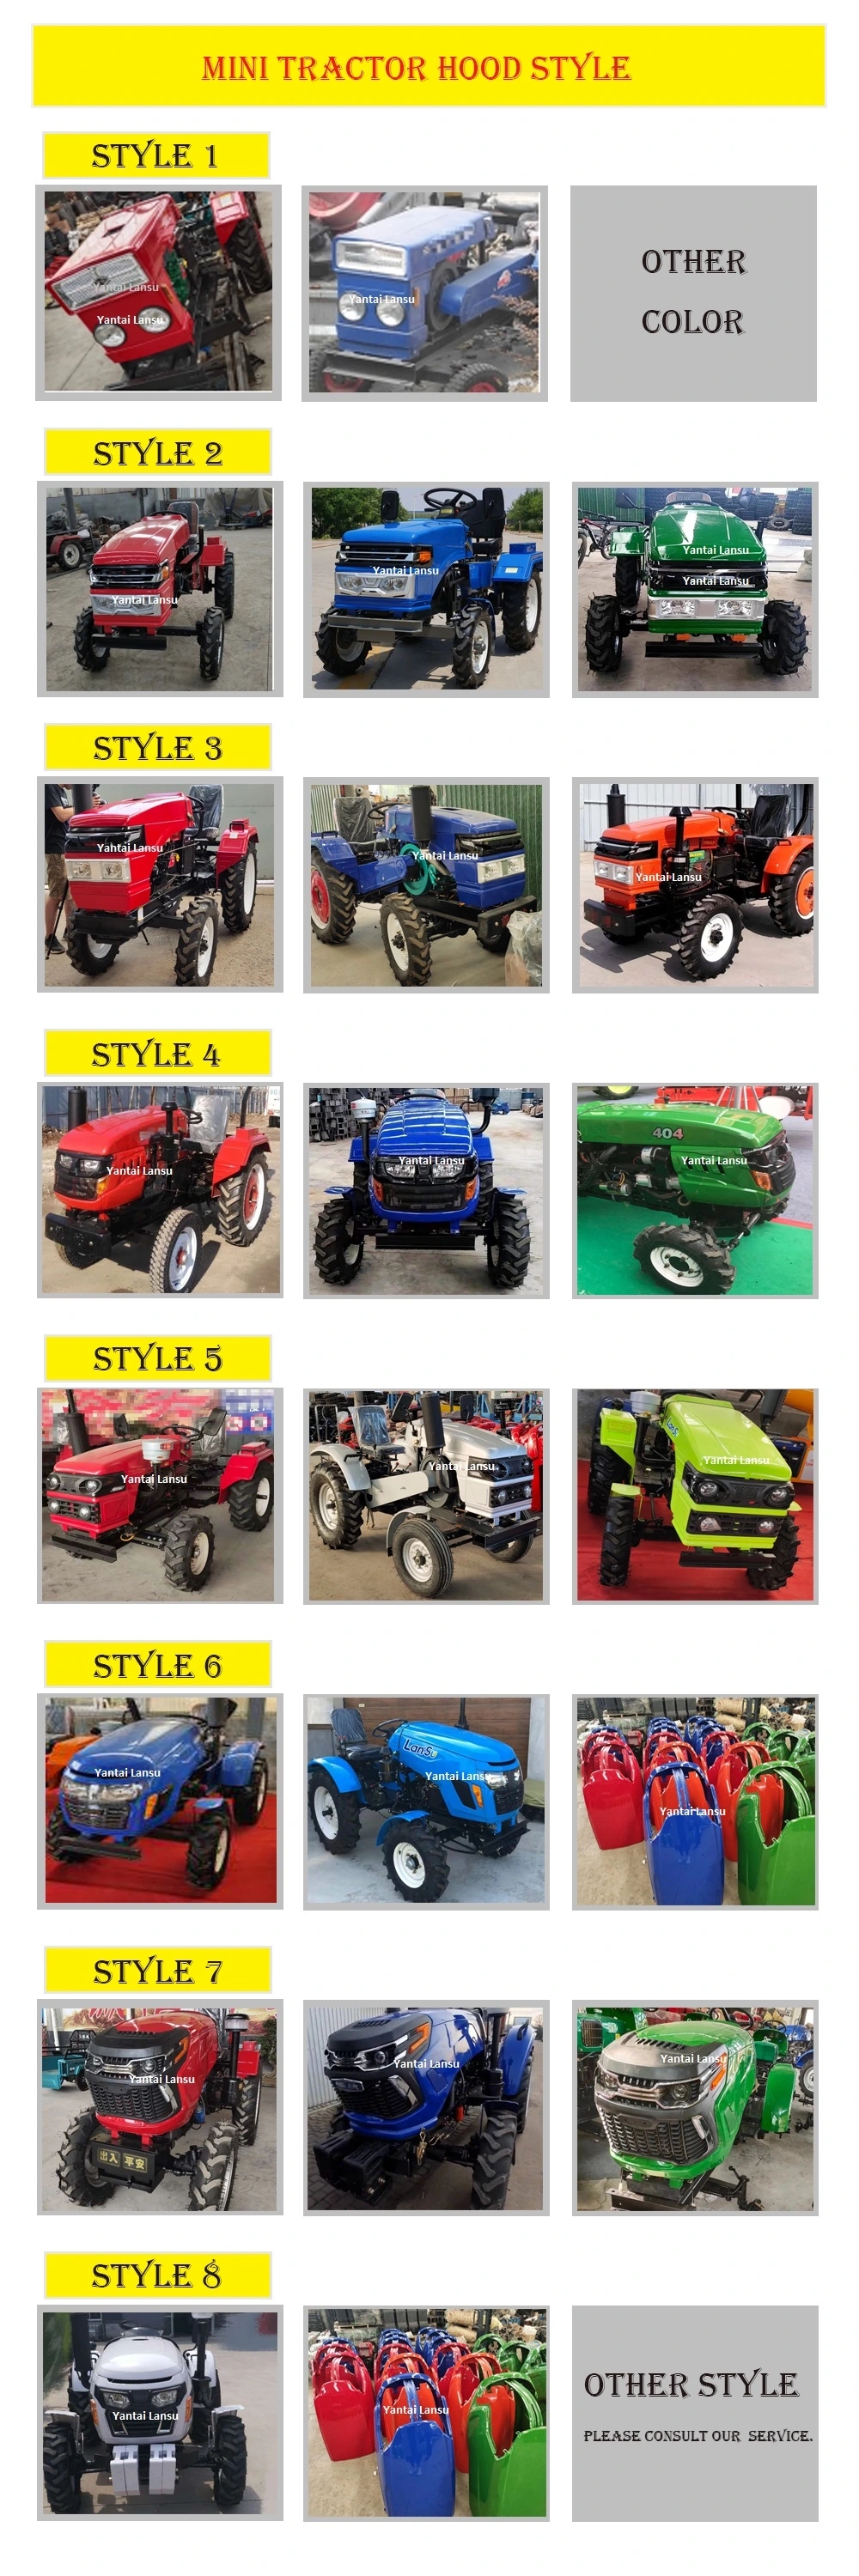 4 Wheel Tractor Farm Tractors with Attachments for Agriculture